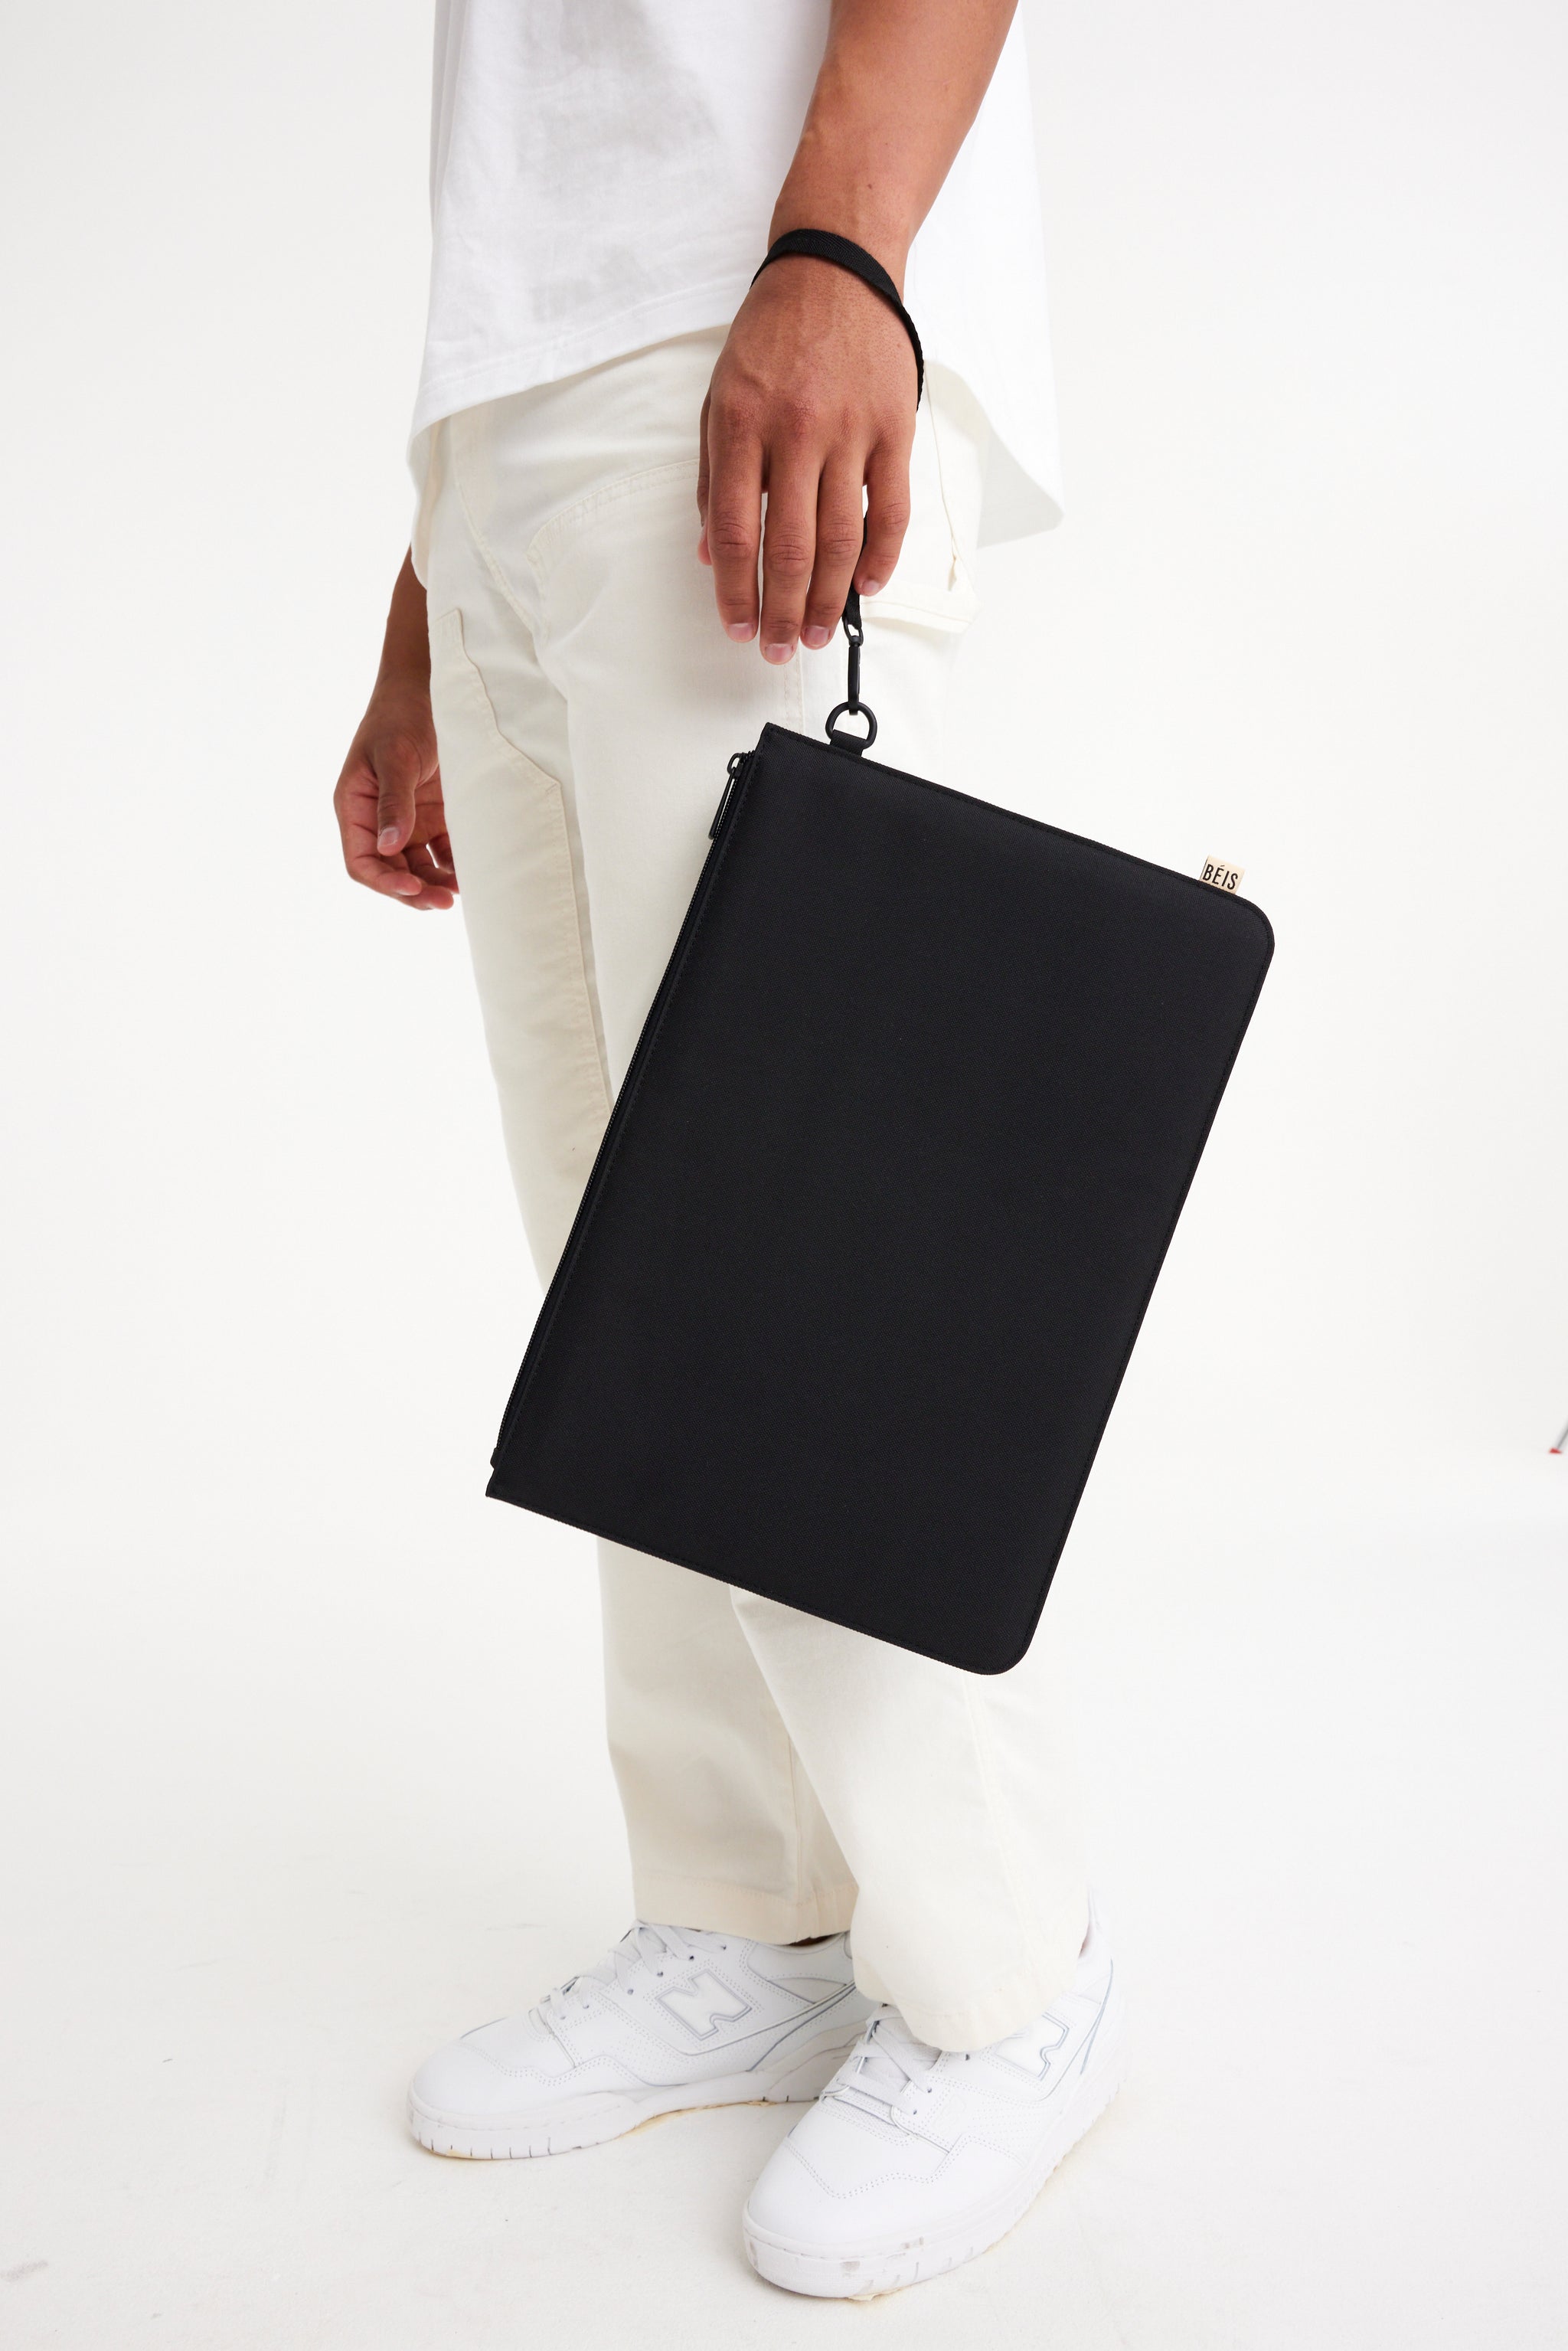 BÉIS 'The BEISICS Laptop Pouch' in Black - Padded Laptop Sleeve in Black